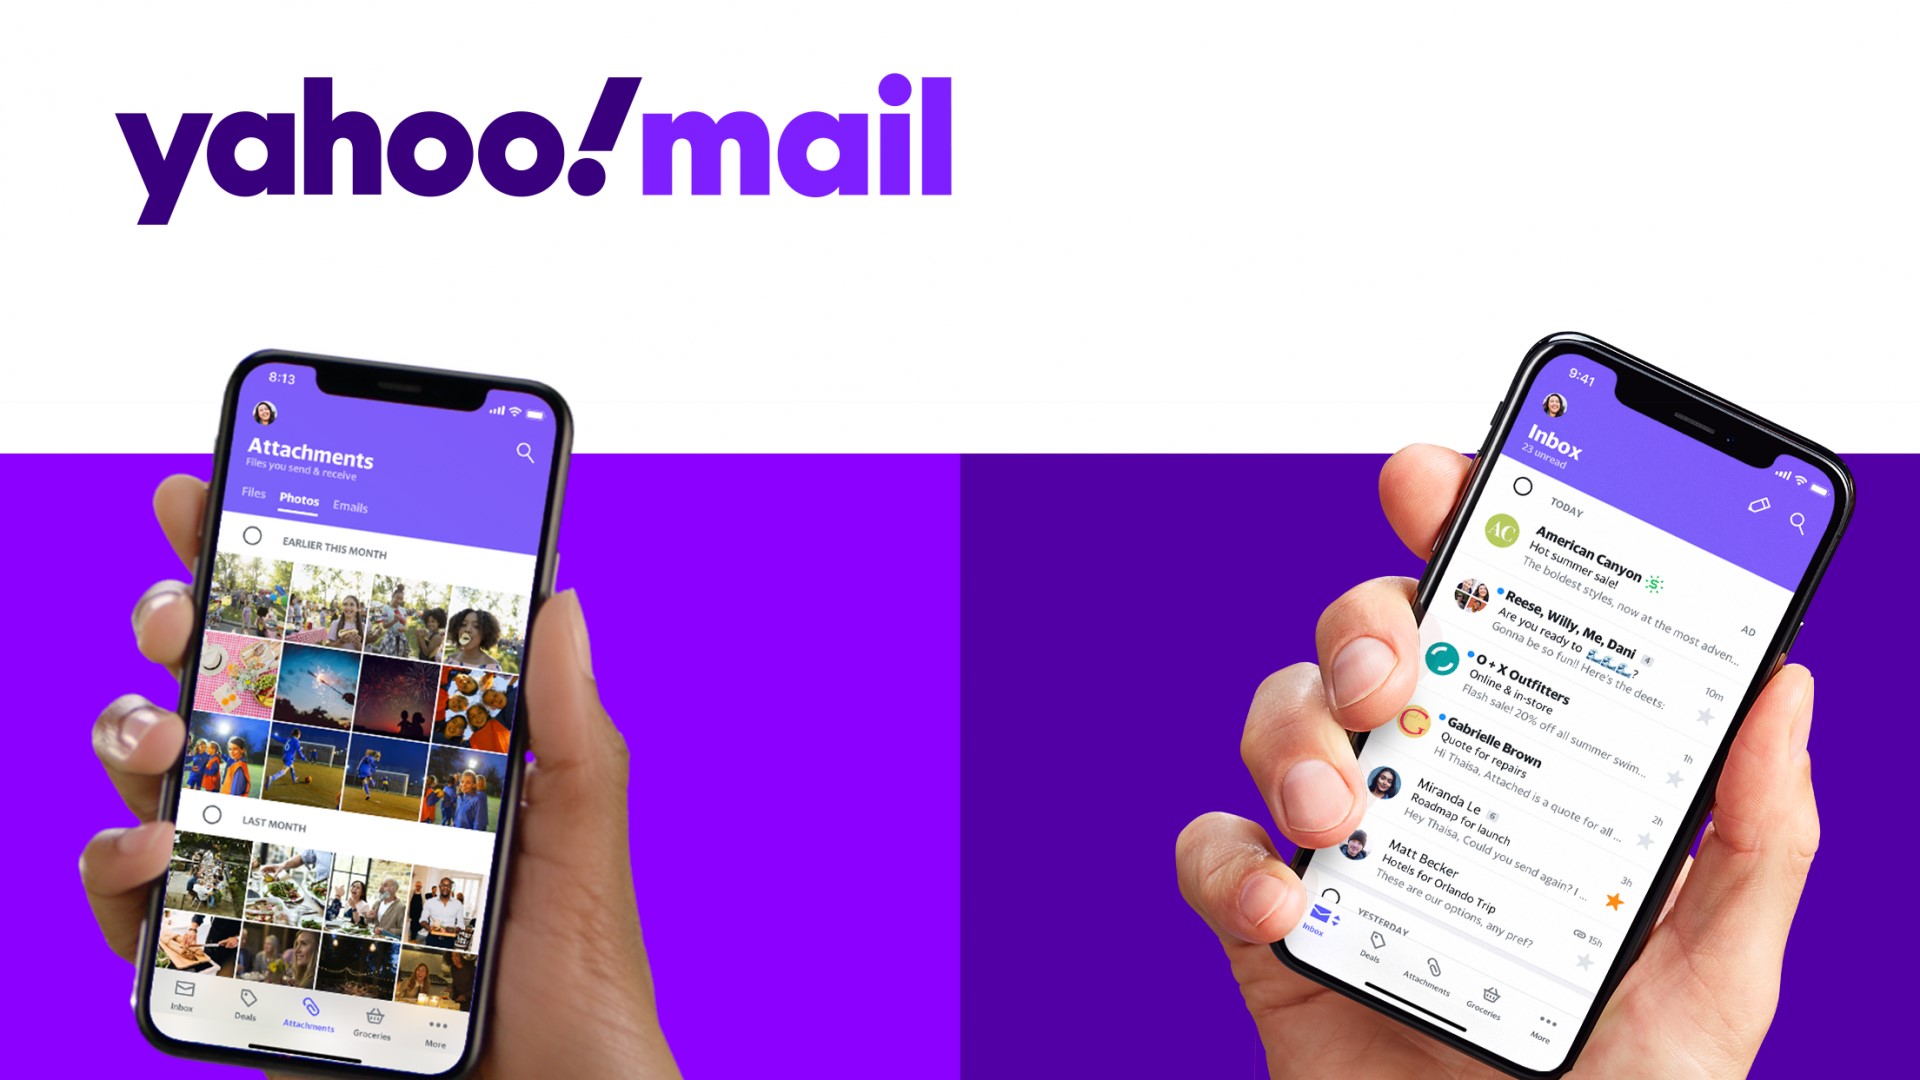 How To Select All Messages In A Yahoo Mail Folder